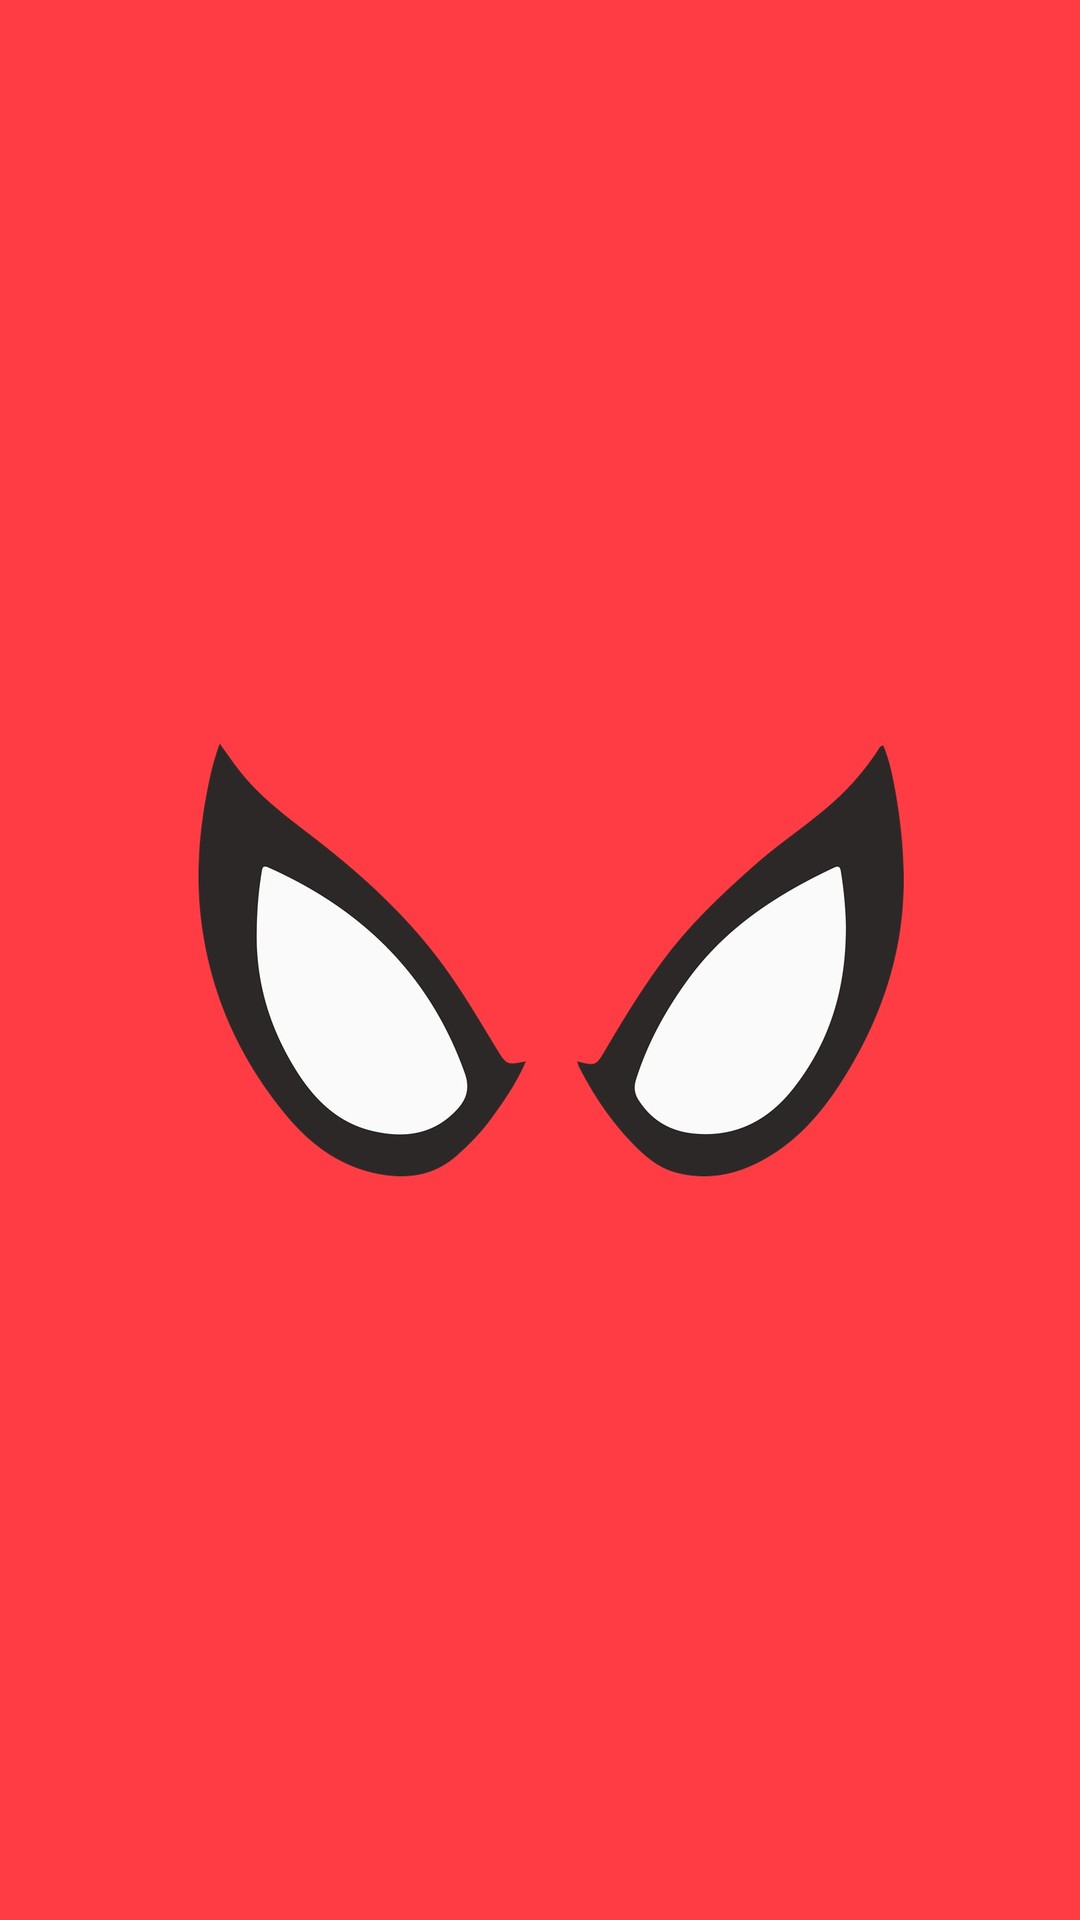 Spiderman Red Minimal Background iPhone Wallpaper - iPhone Wallpapers